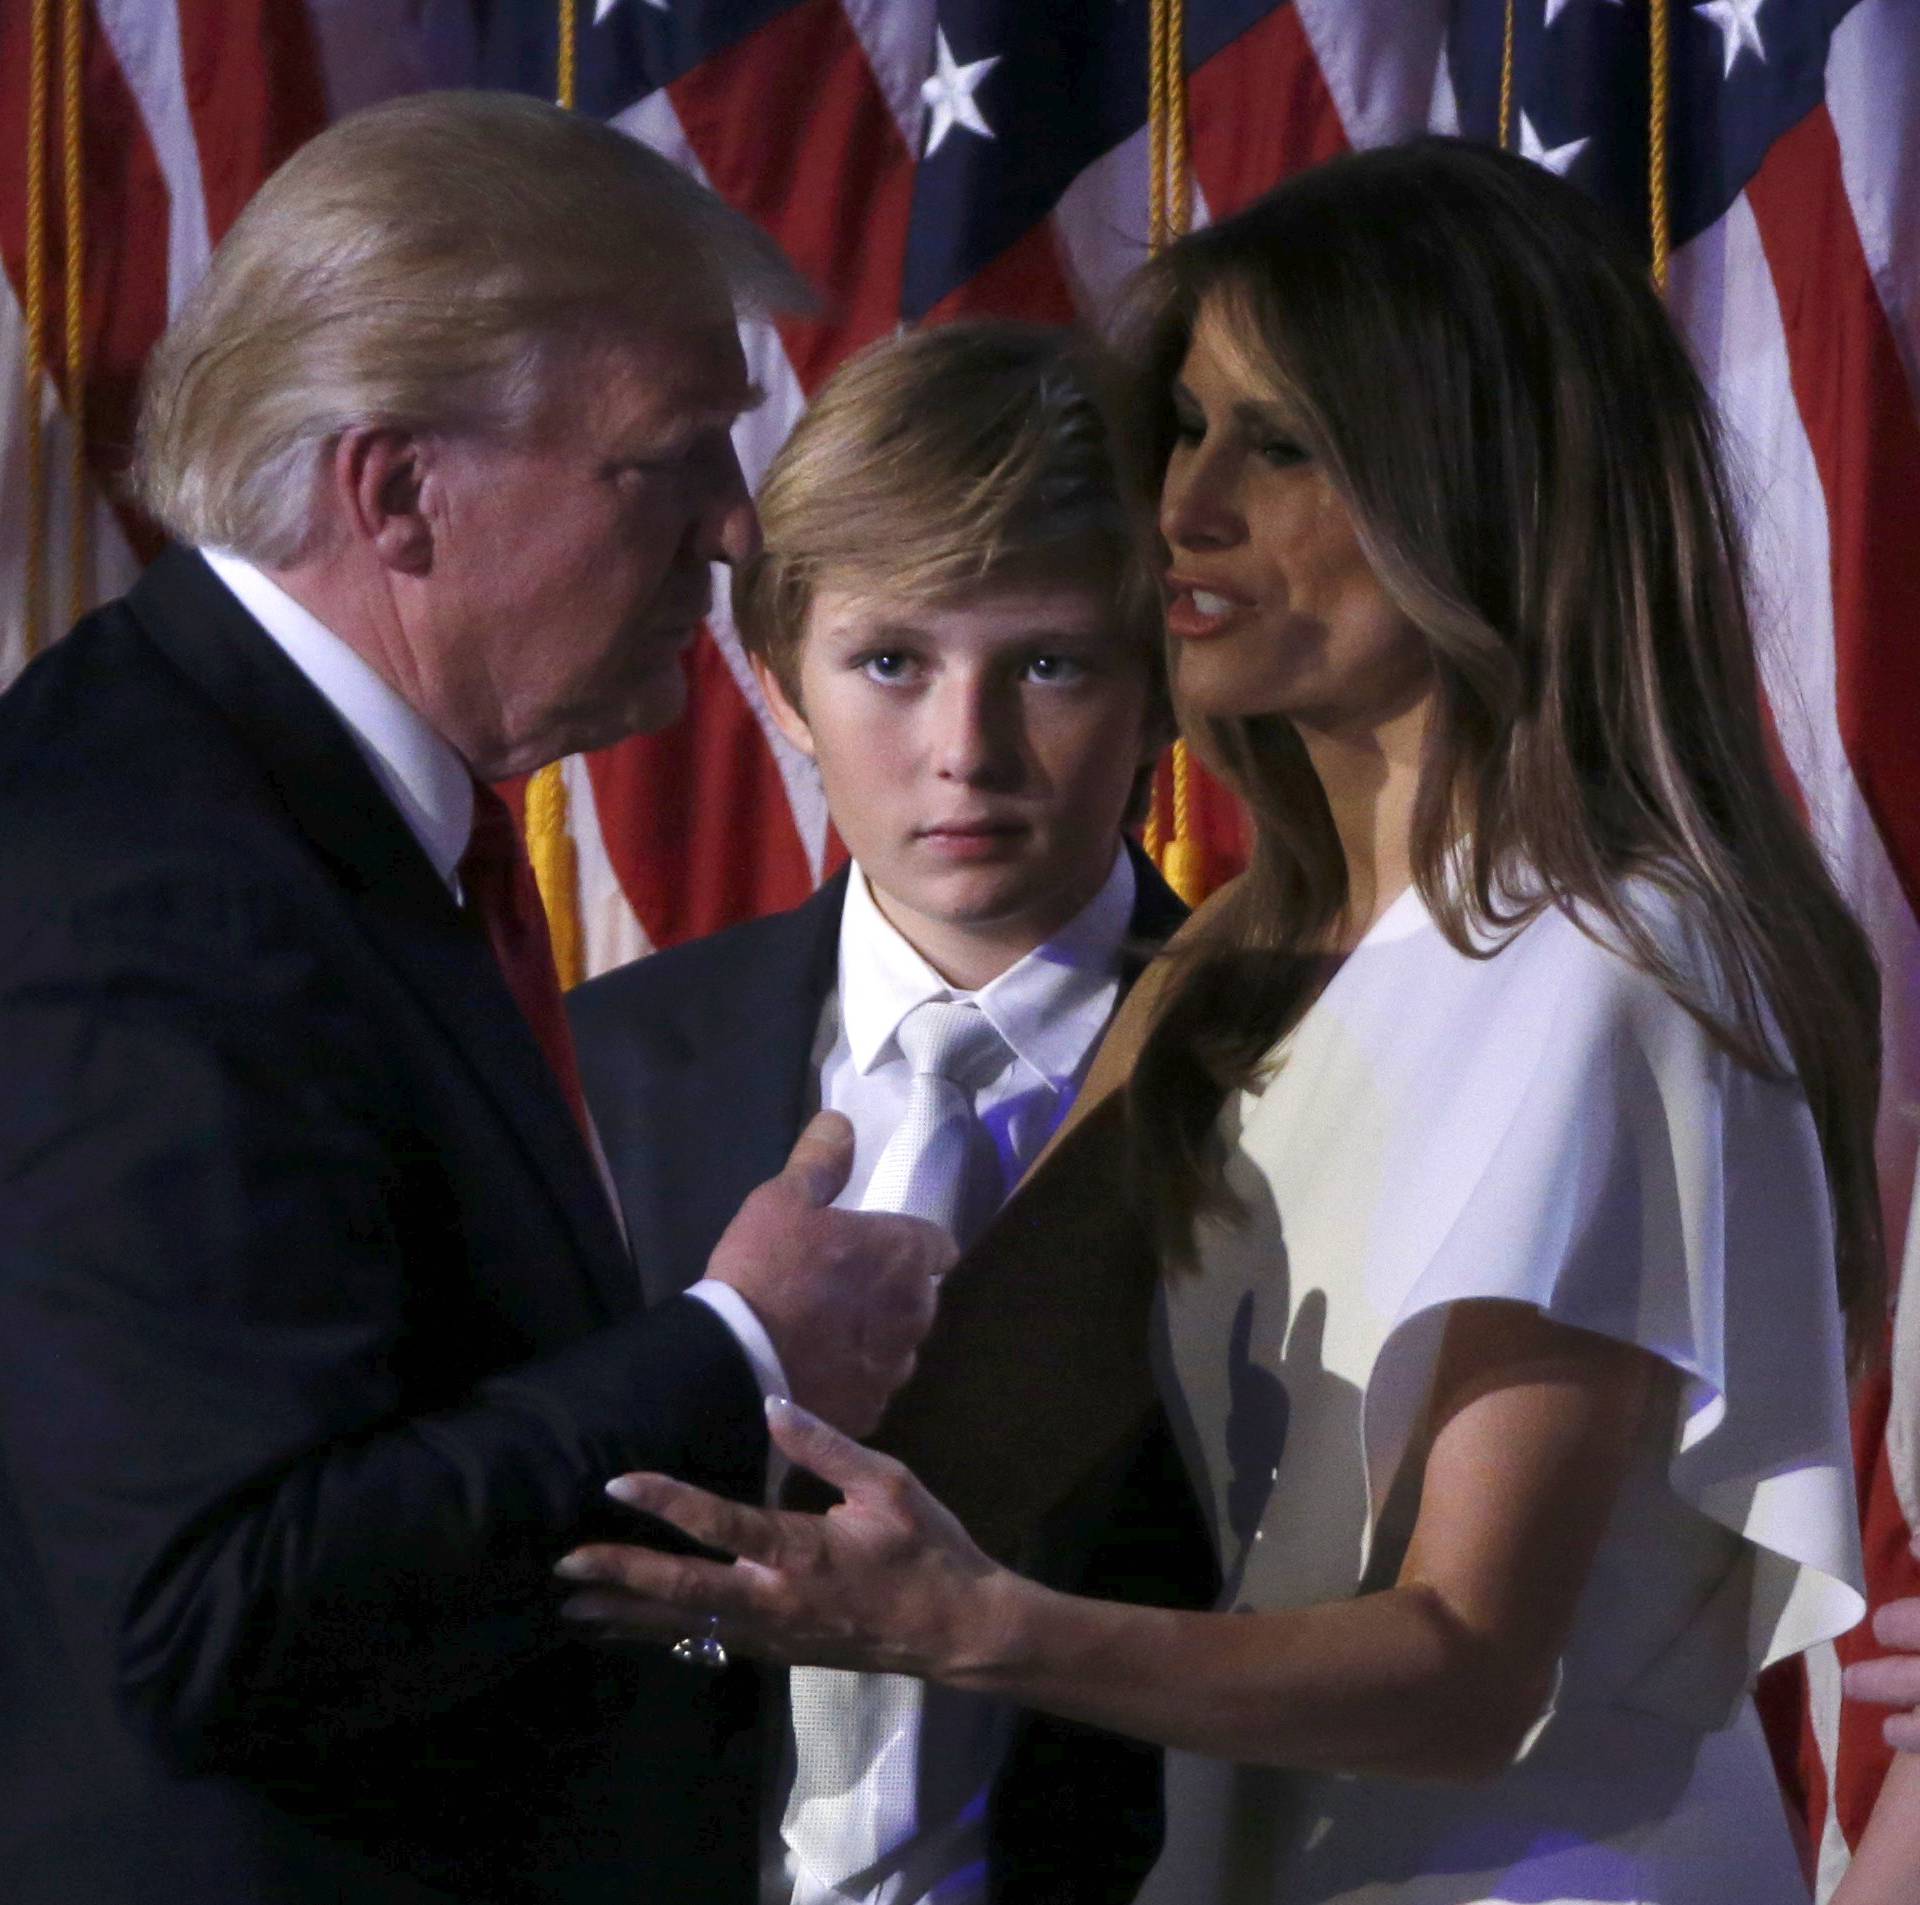 Republican U.S. president-elect Donald Trump speaks with family at his election night rally in Manhattan, New York